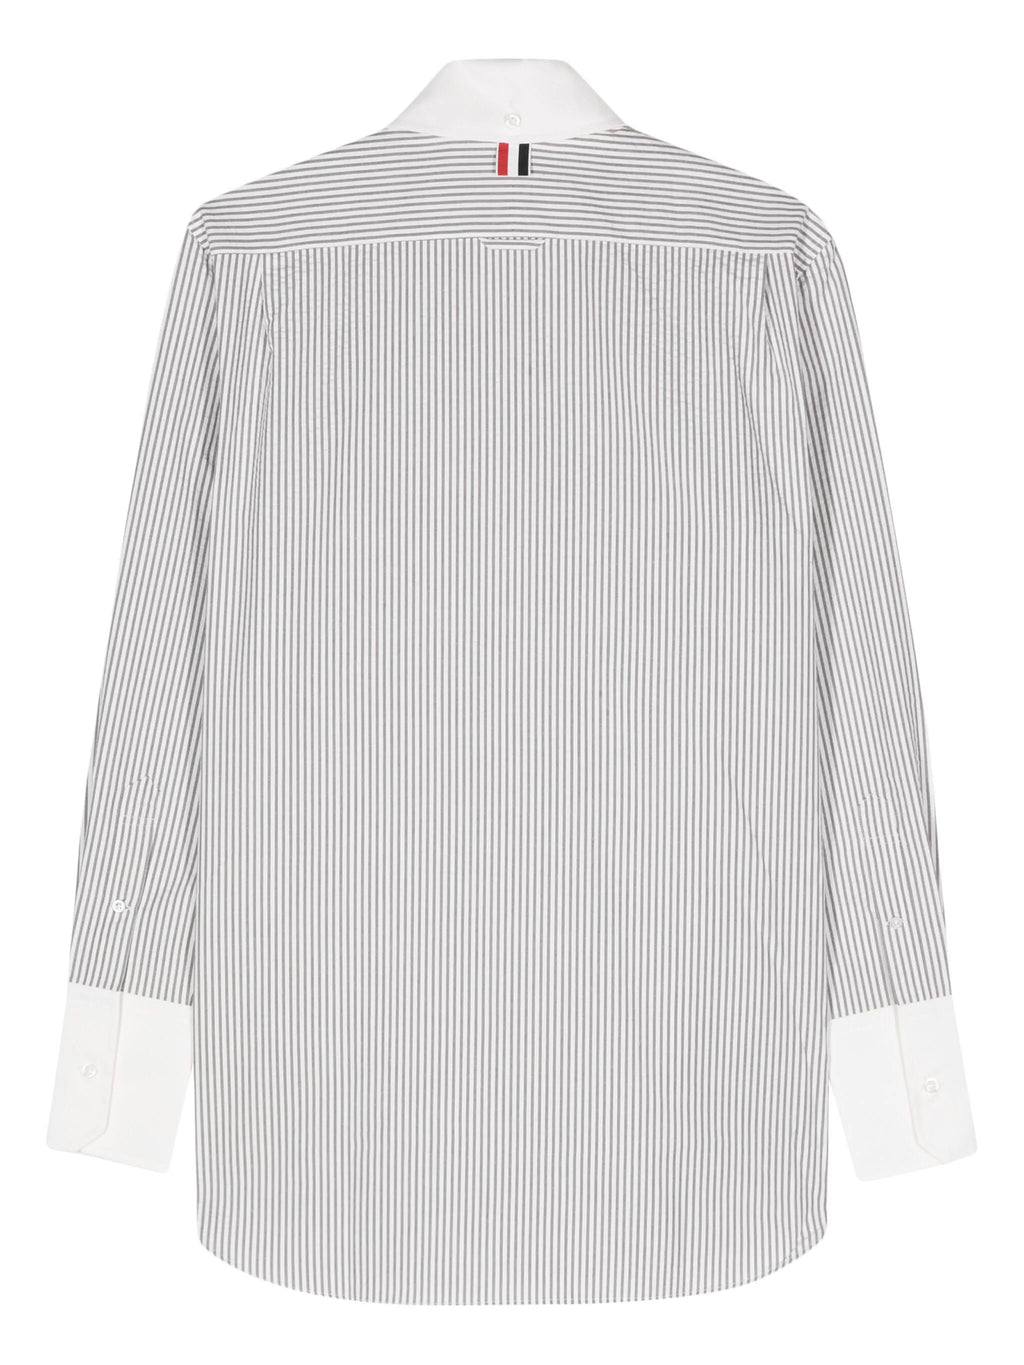 THOM BROWNE Women Exaggerated Easy Fit Point Collar Shirt W/ Combo Collar And Cuffs In Seersucker